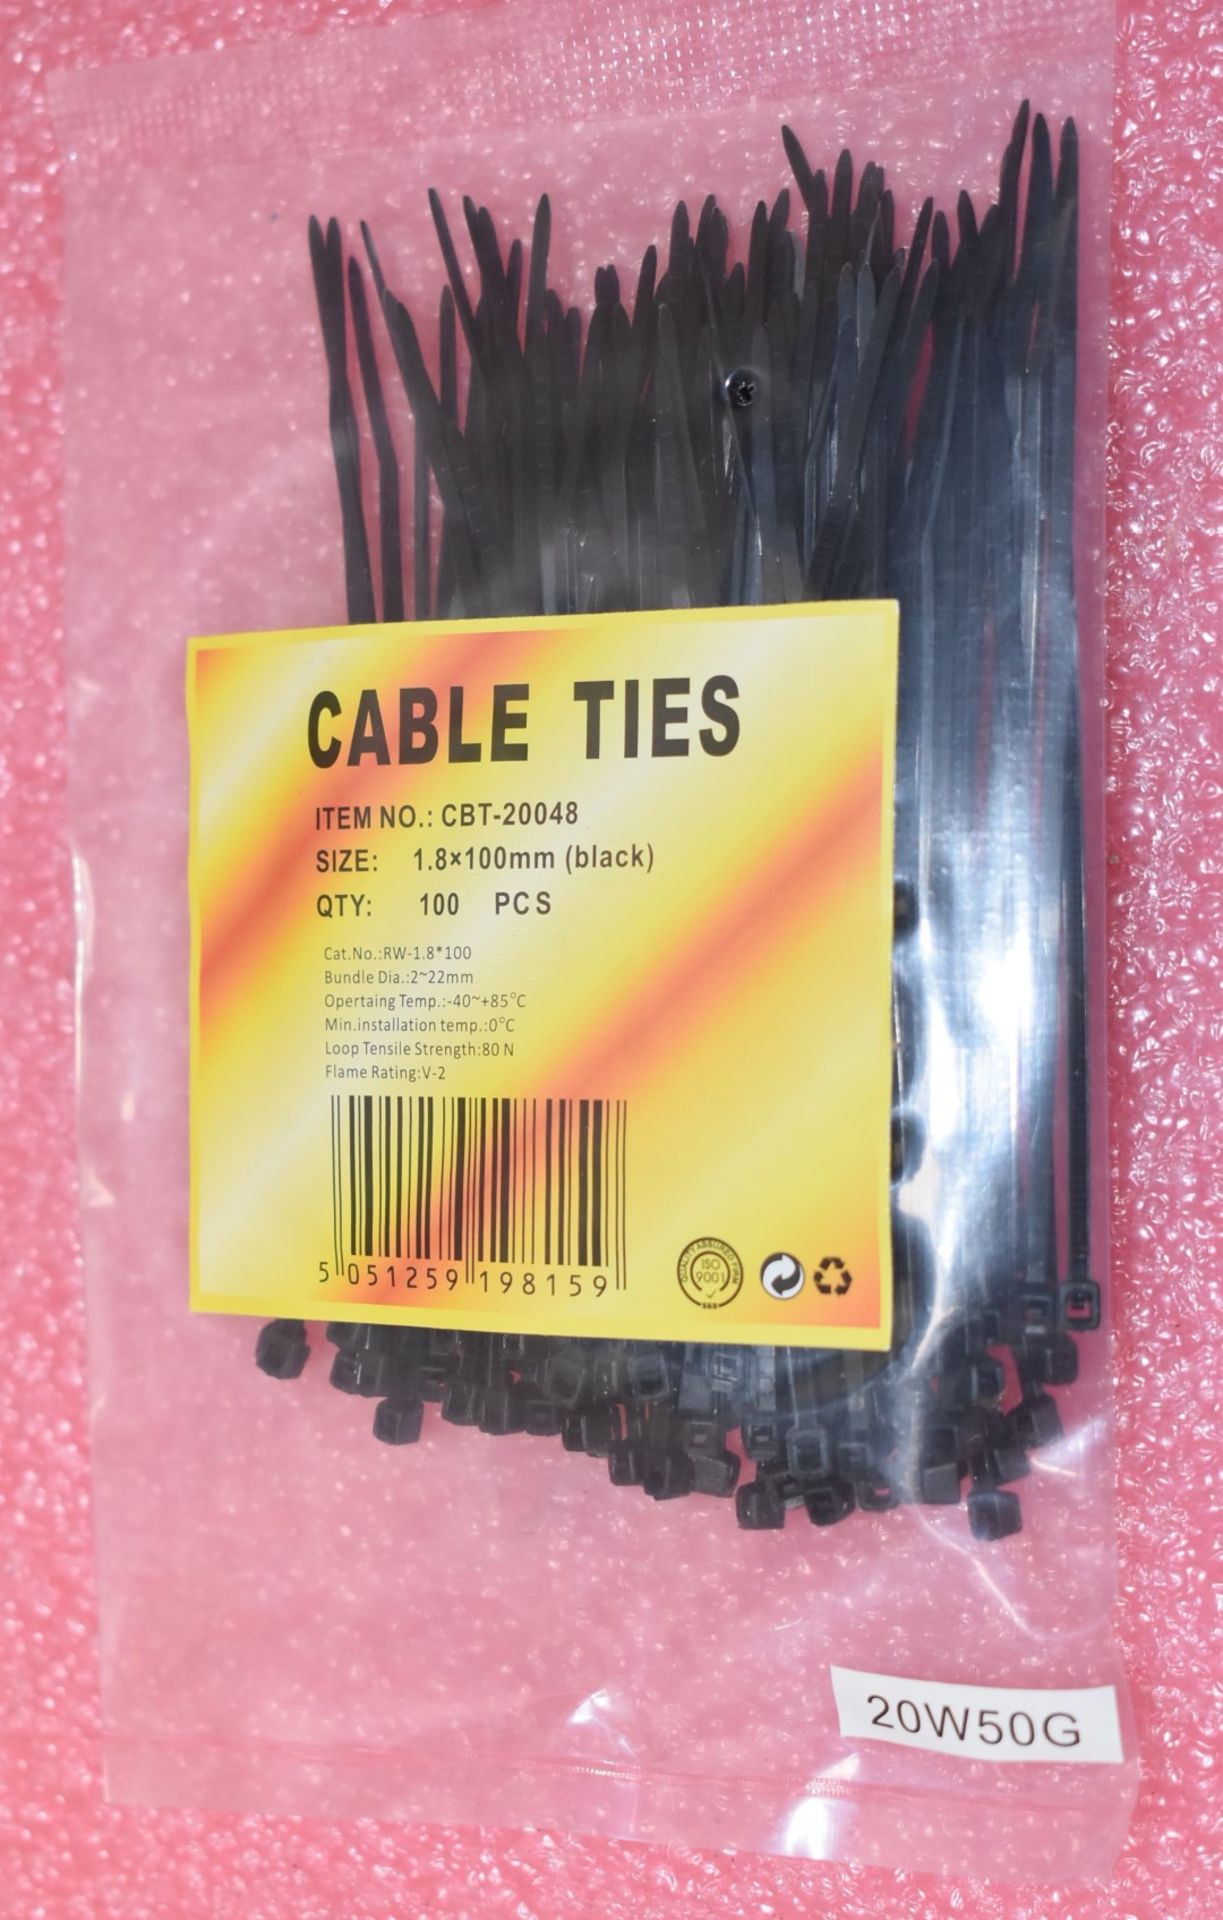 16,000 x Black Cable Ties - Includes 100 Packs of 100 Ties - Size: 1.8 x 100mm - Brand New Stock - Image 2 of 3